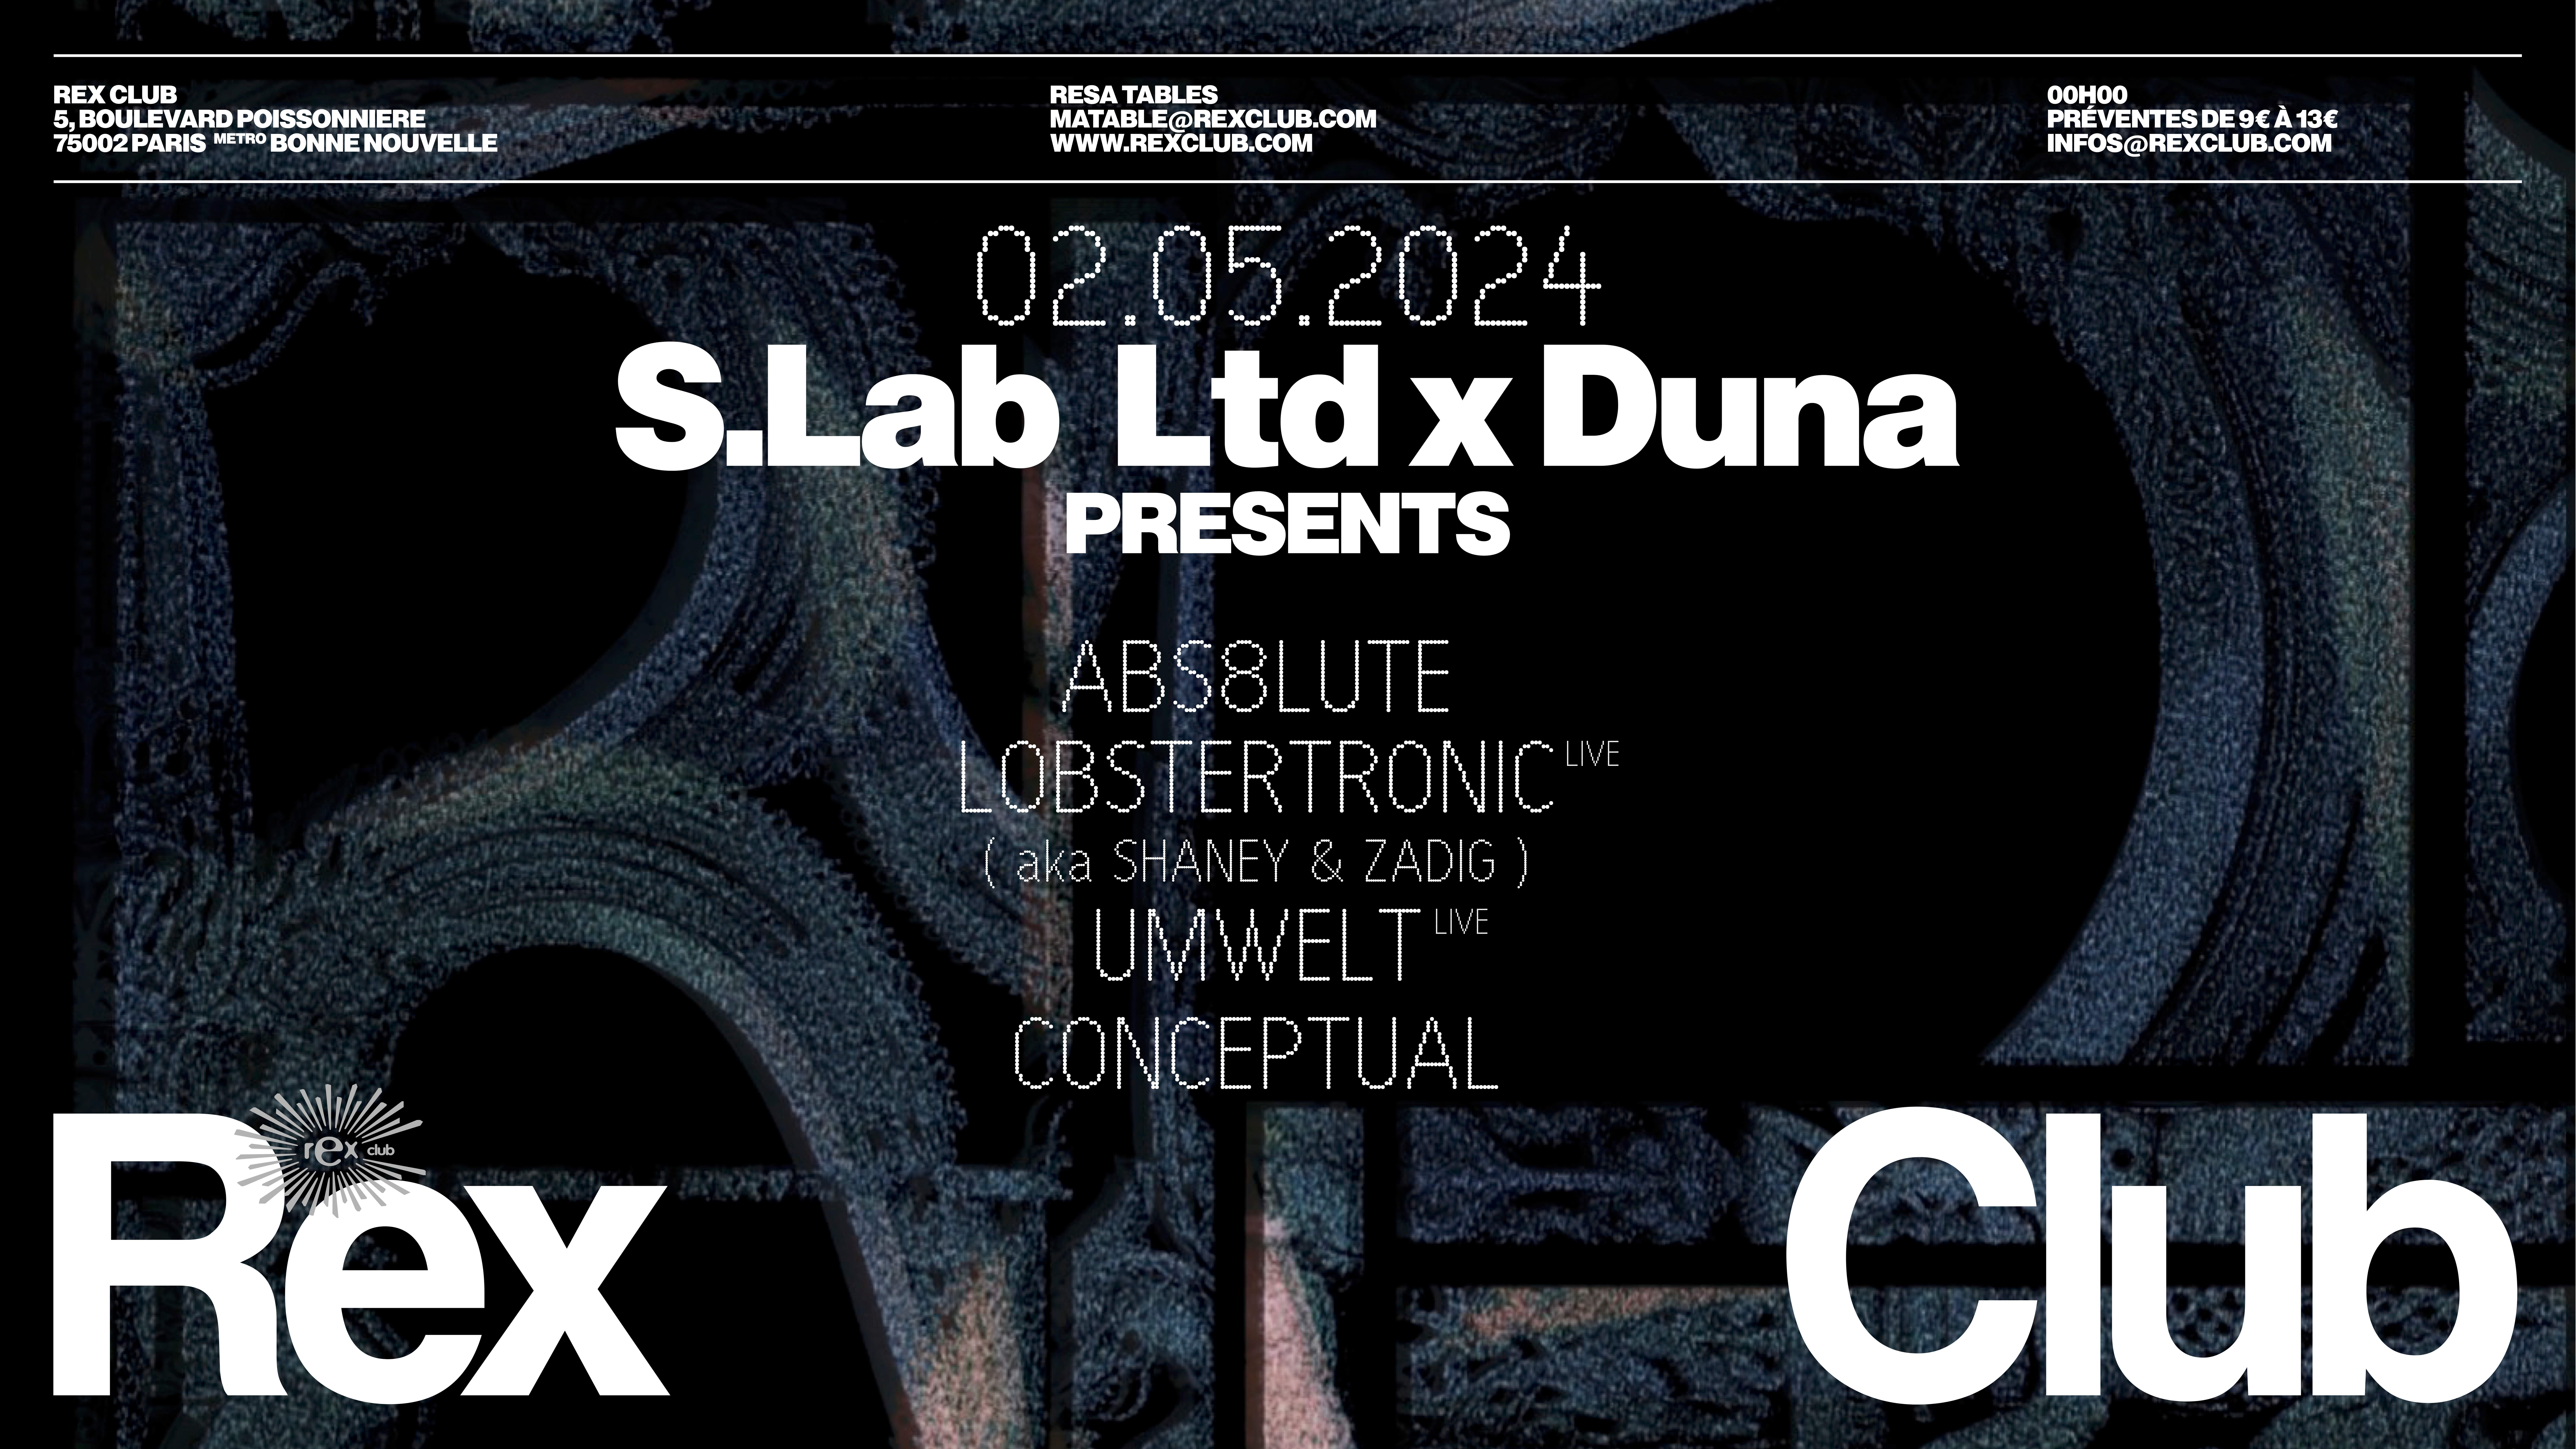 S.Lab Ltd x Duna: abs8lute, Lobstertronic Live (Shaney & Zadig), Umwelt Live, CONCEPTUAL - フライヤー表